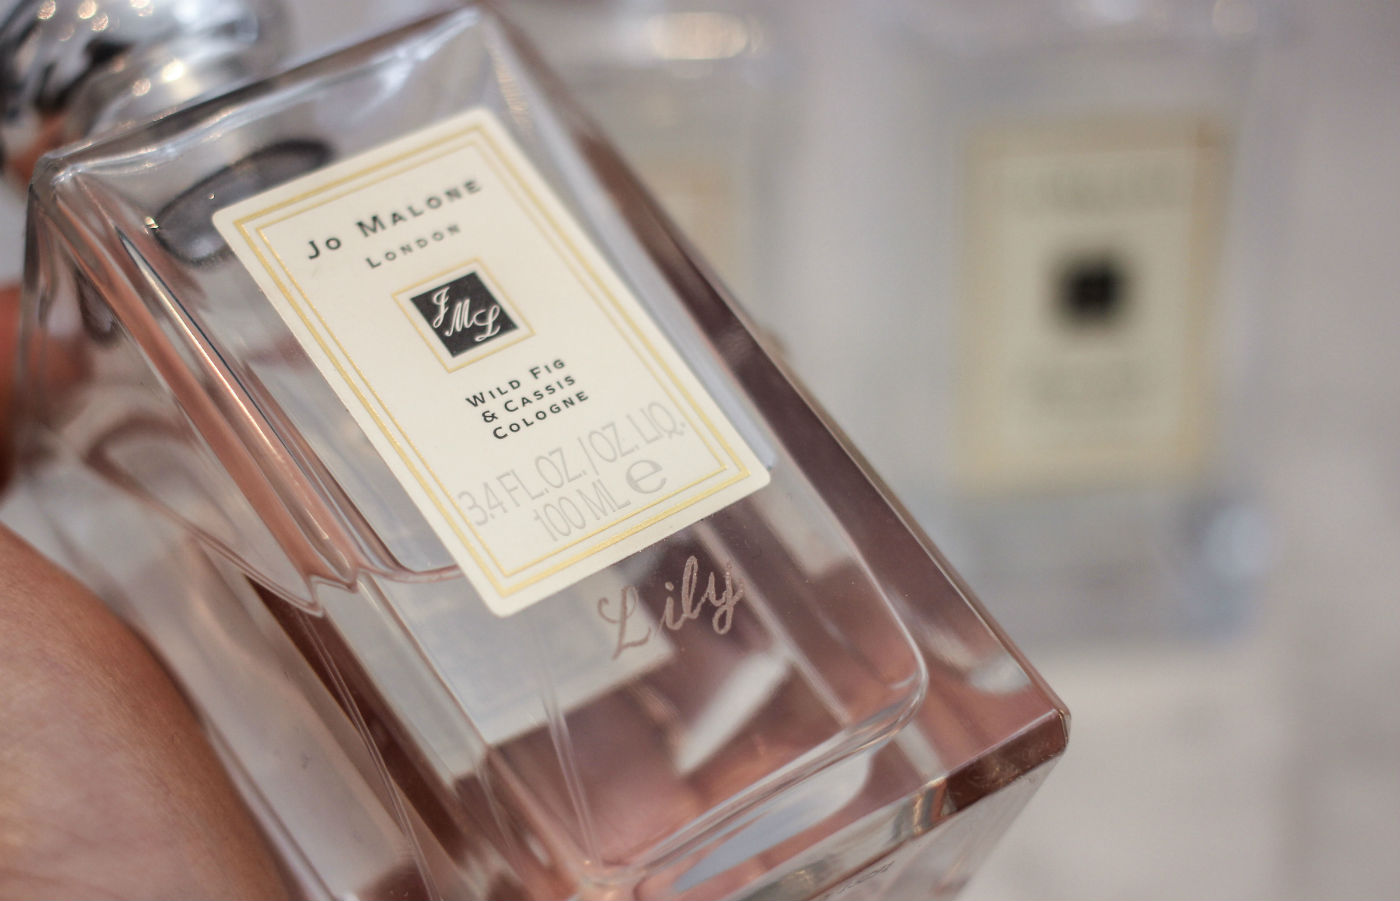 JO MALONE // ENGRAVE YOUR BOTTLE FOR FREE!